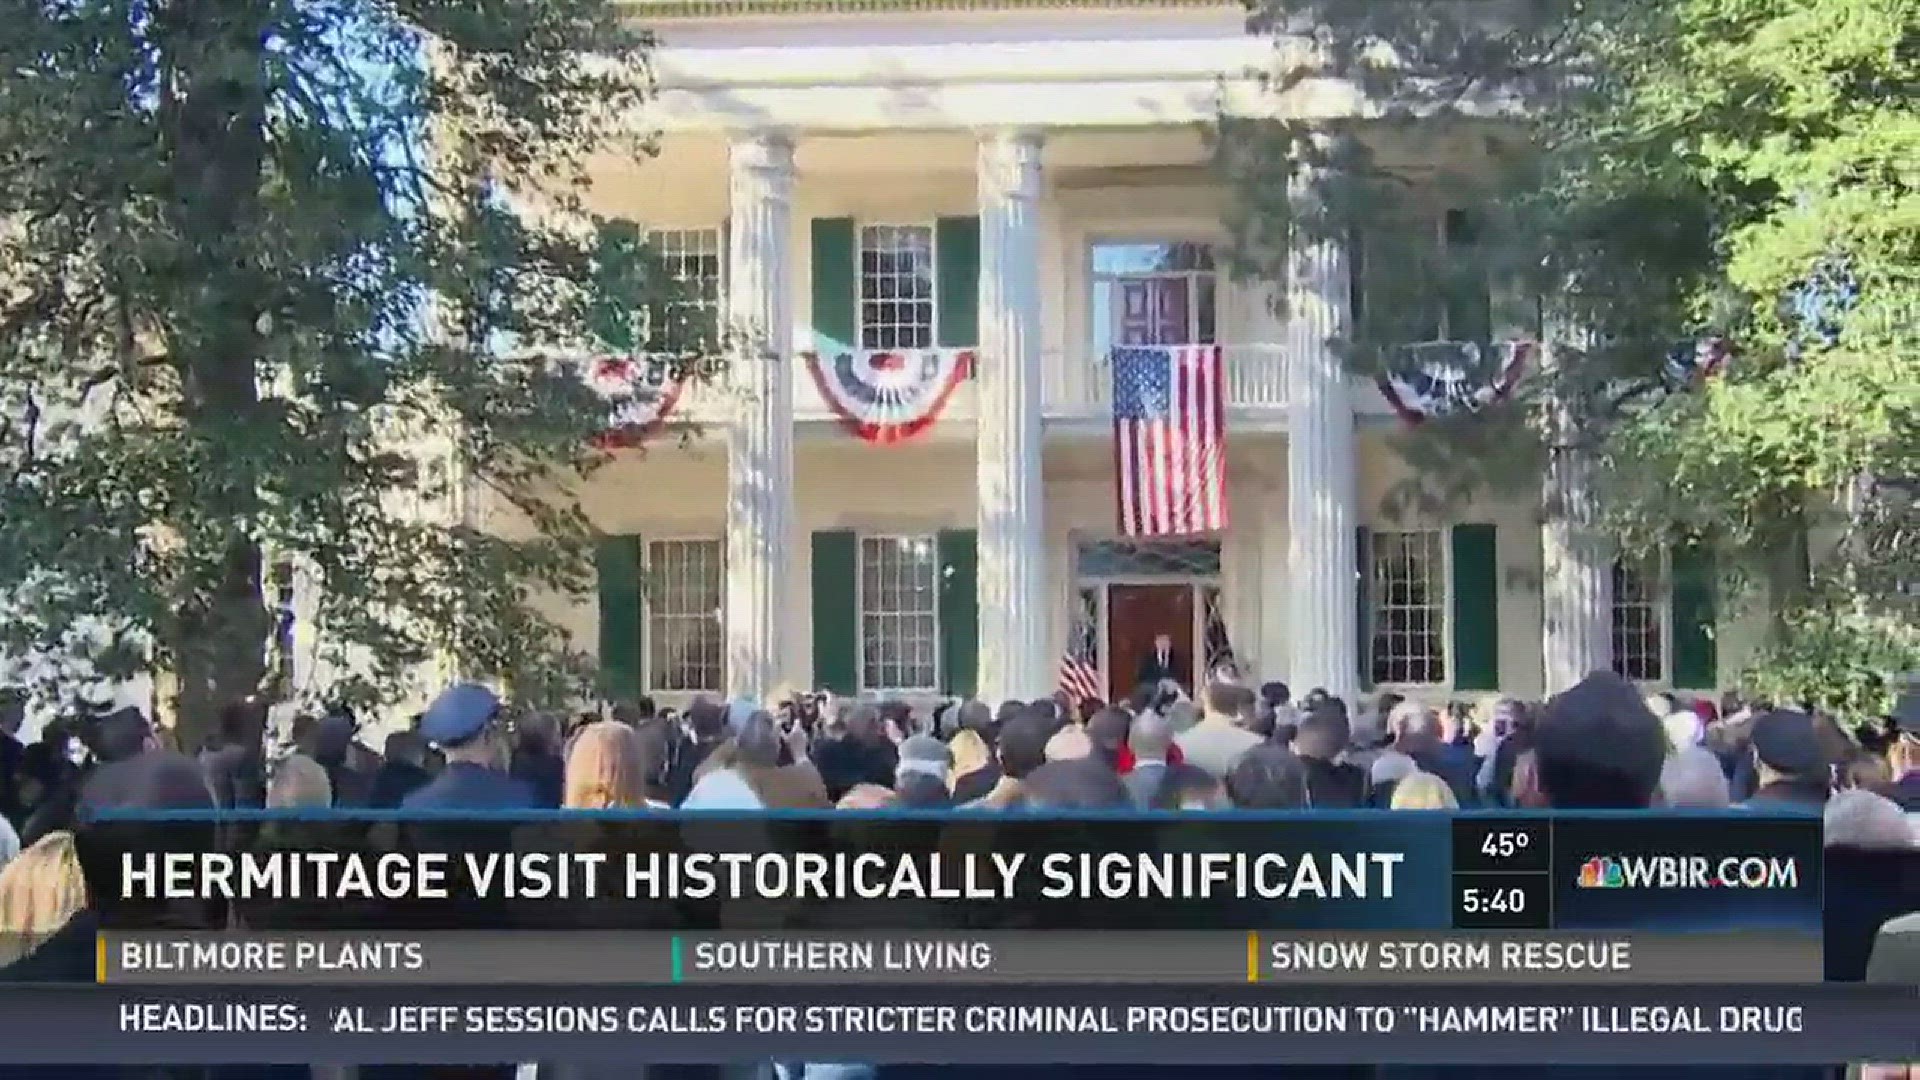 March 16, 2017: President Trump is fresh off a trip to Middle Tennessee where he paid a visit to President Andrew Jackson's homestead.